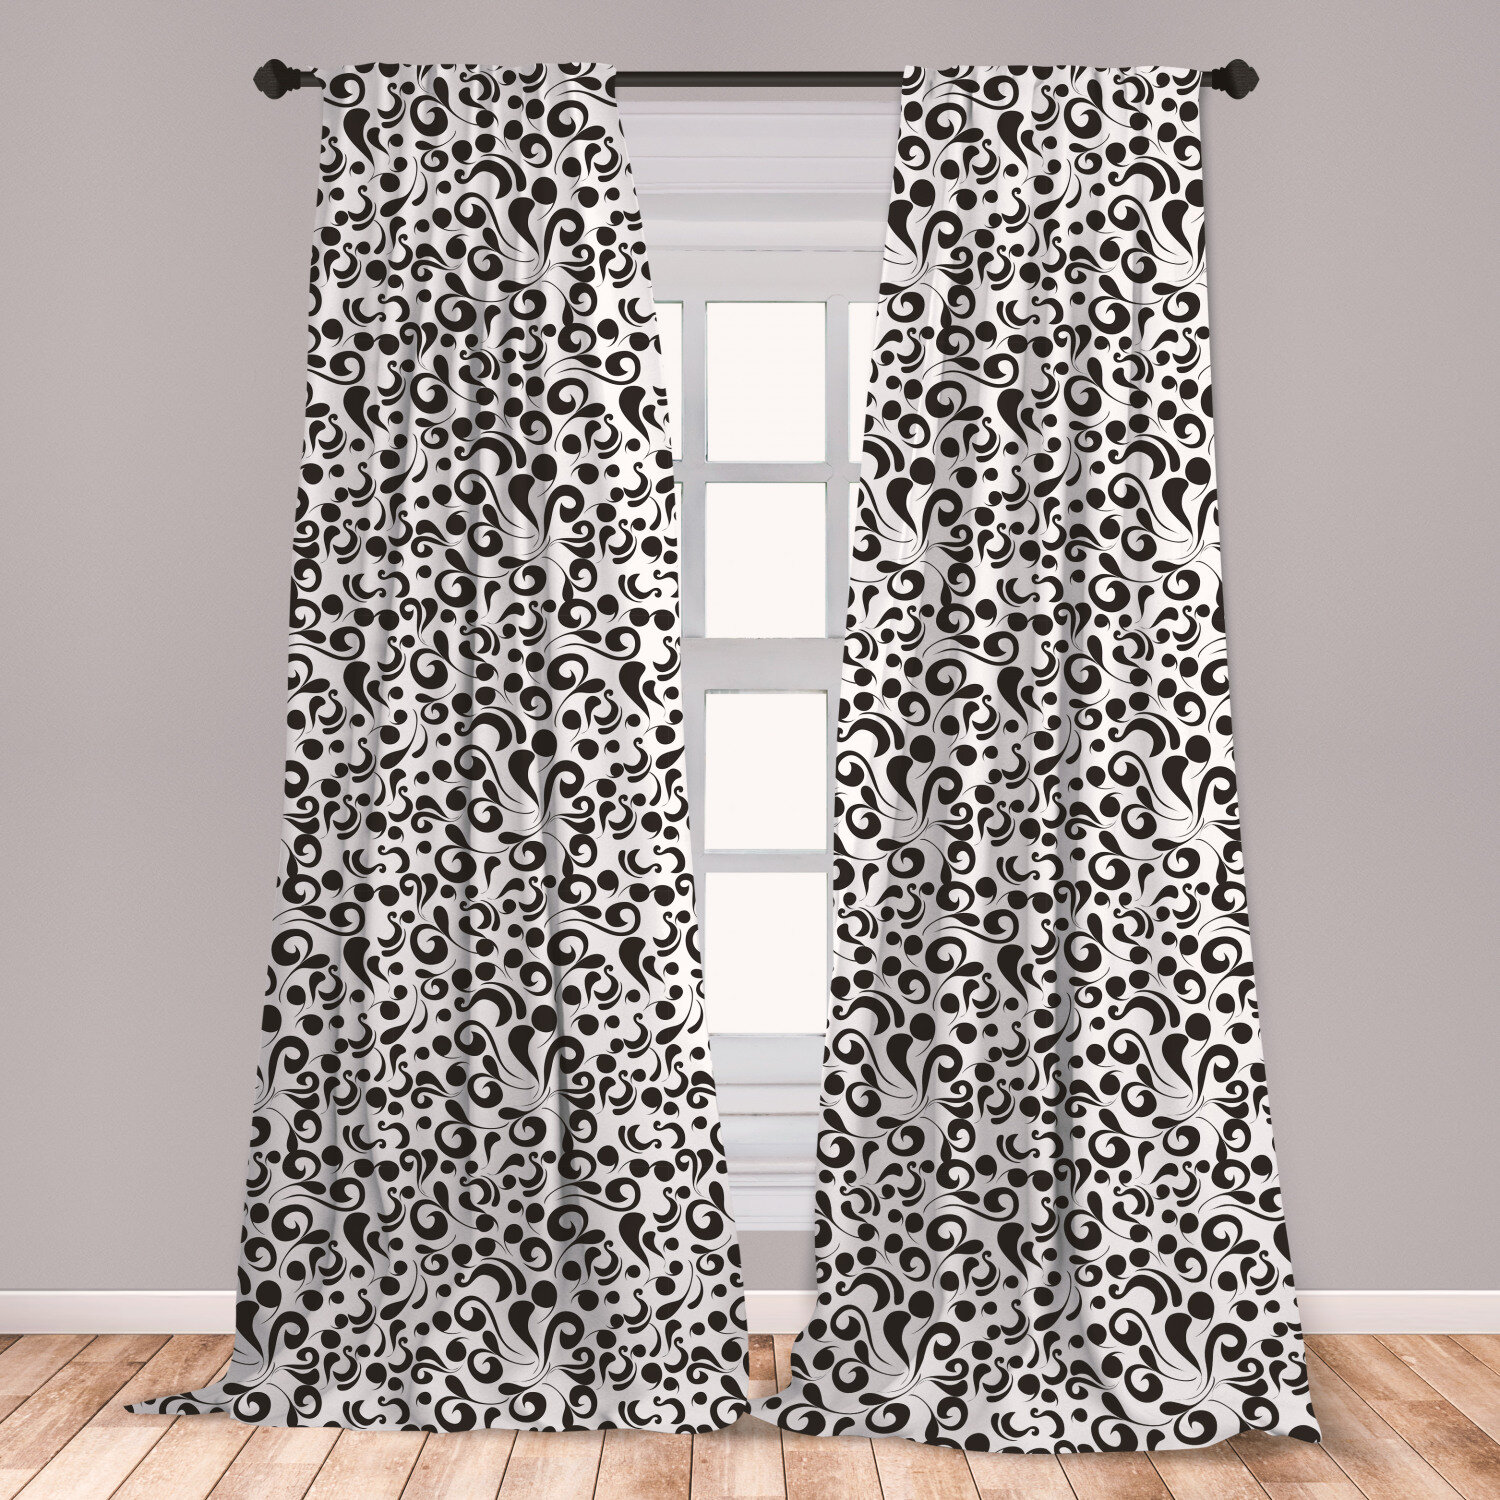 Ambesonne Black And White Curtains Curly Lines And Swirls Nature Abstraction Floral Style Leaf Shapes Art Window Treatments 2 Panel Set For Living Room Bedroom Decor 56 X 95 Black White 